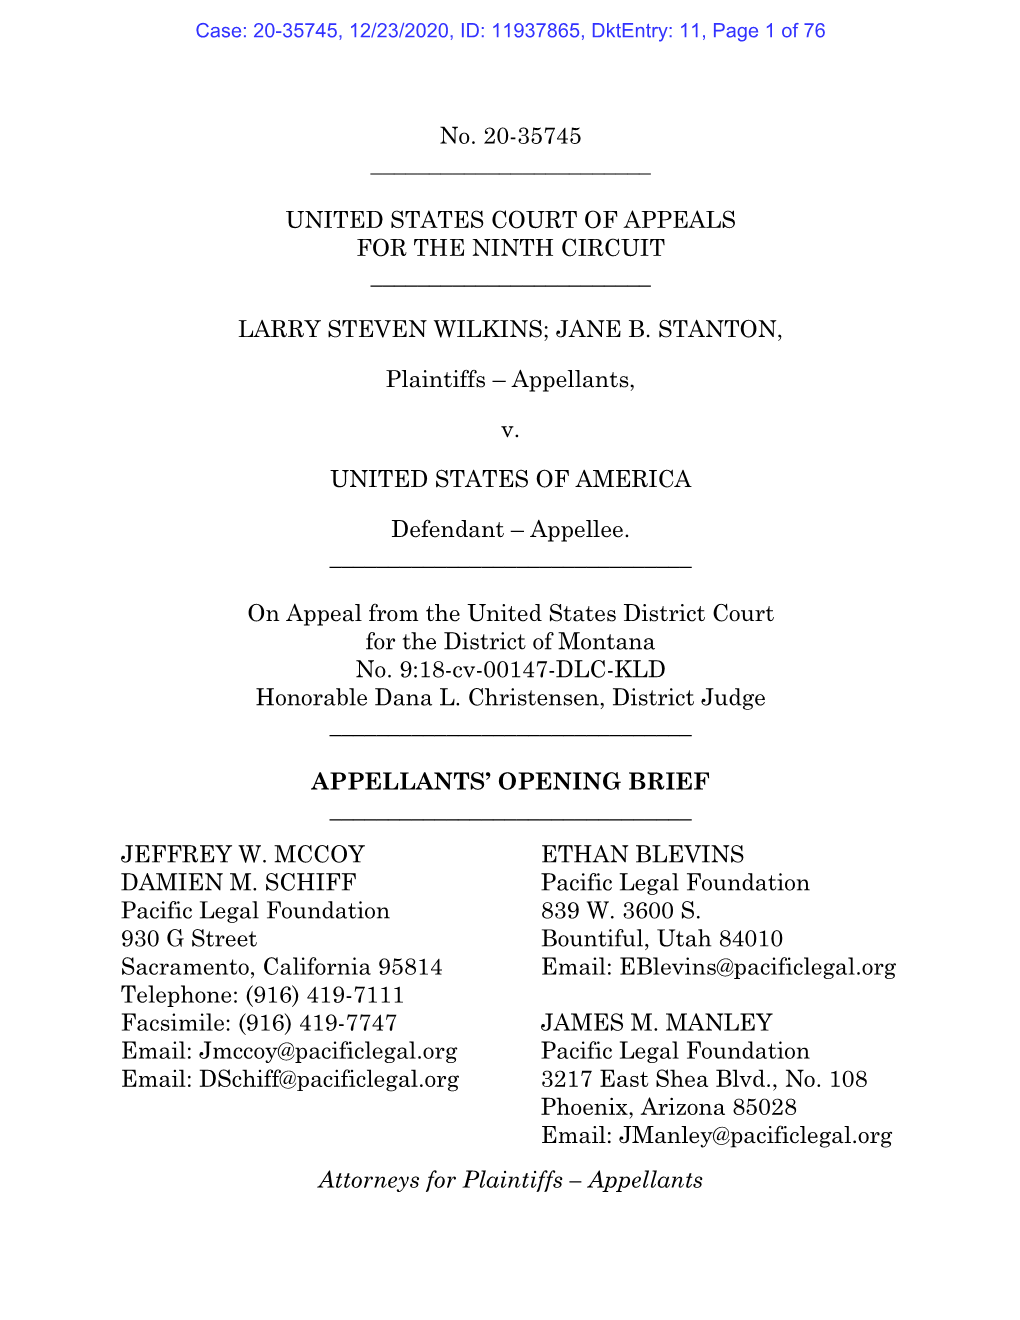 United States Court of Appeals for the Ninth Circuit ______